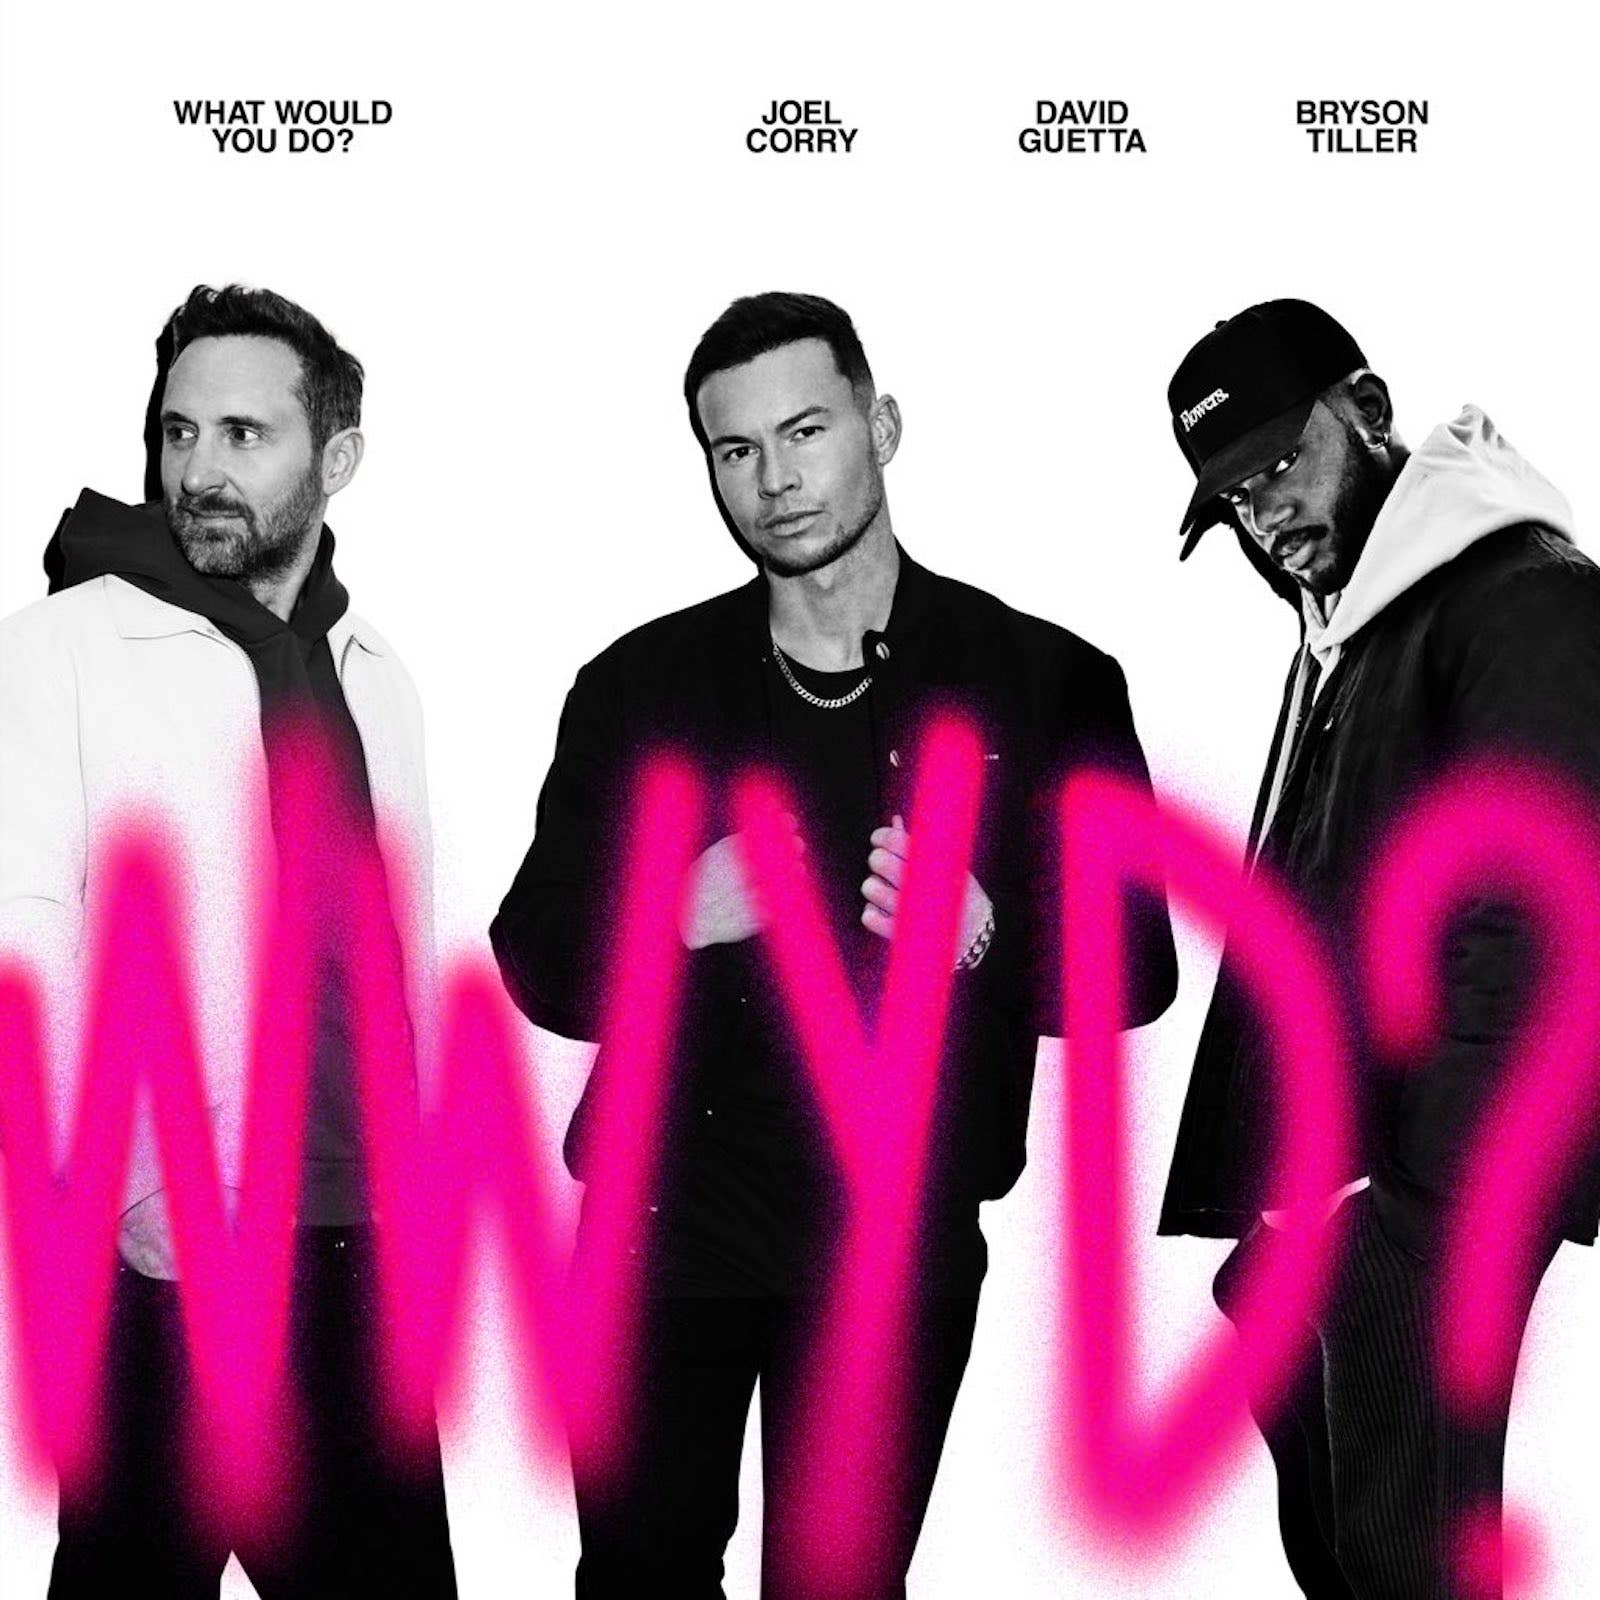 Bryson Tiller, Joel Corry and David Guetta "What Would You Do?"